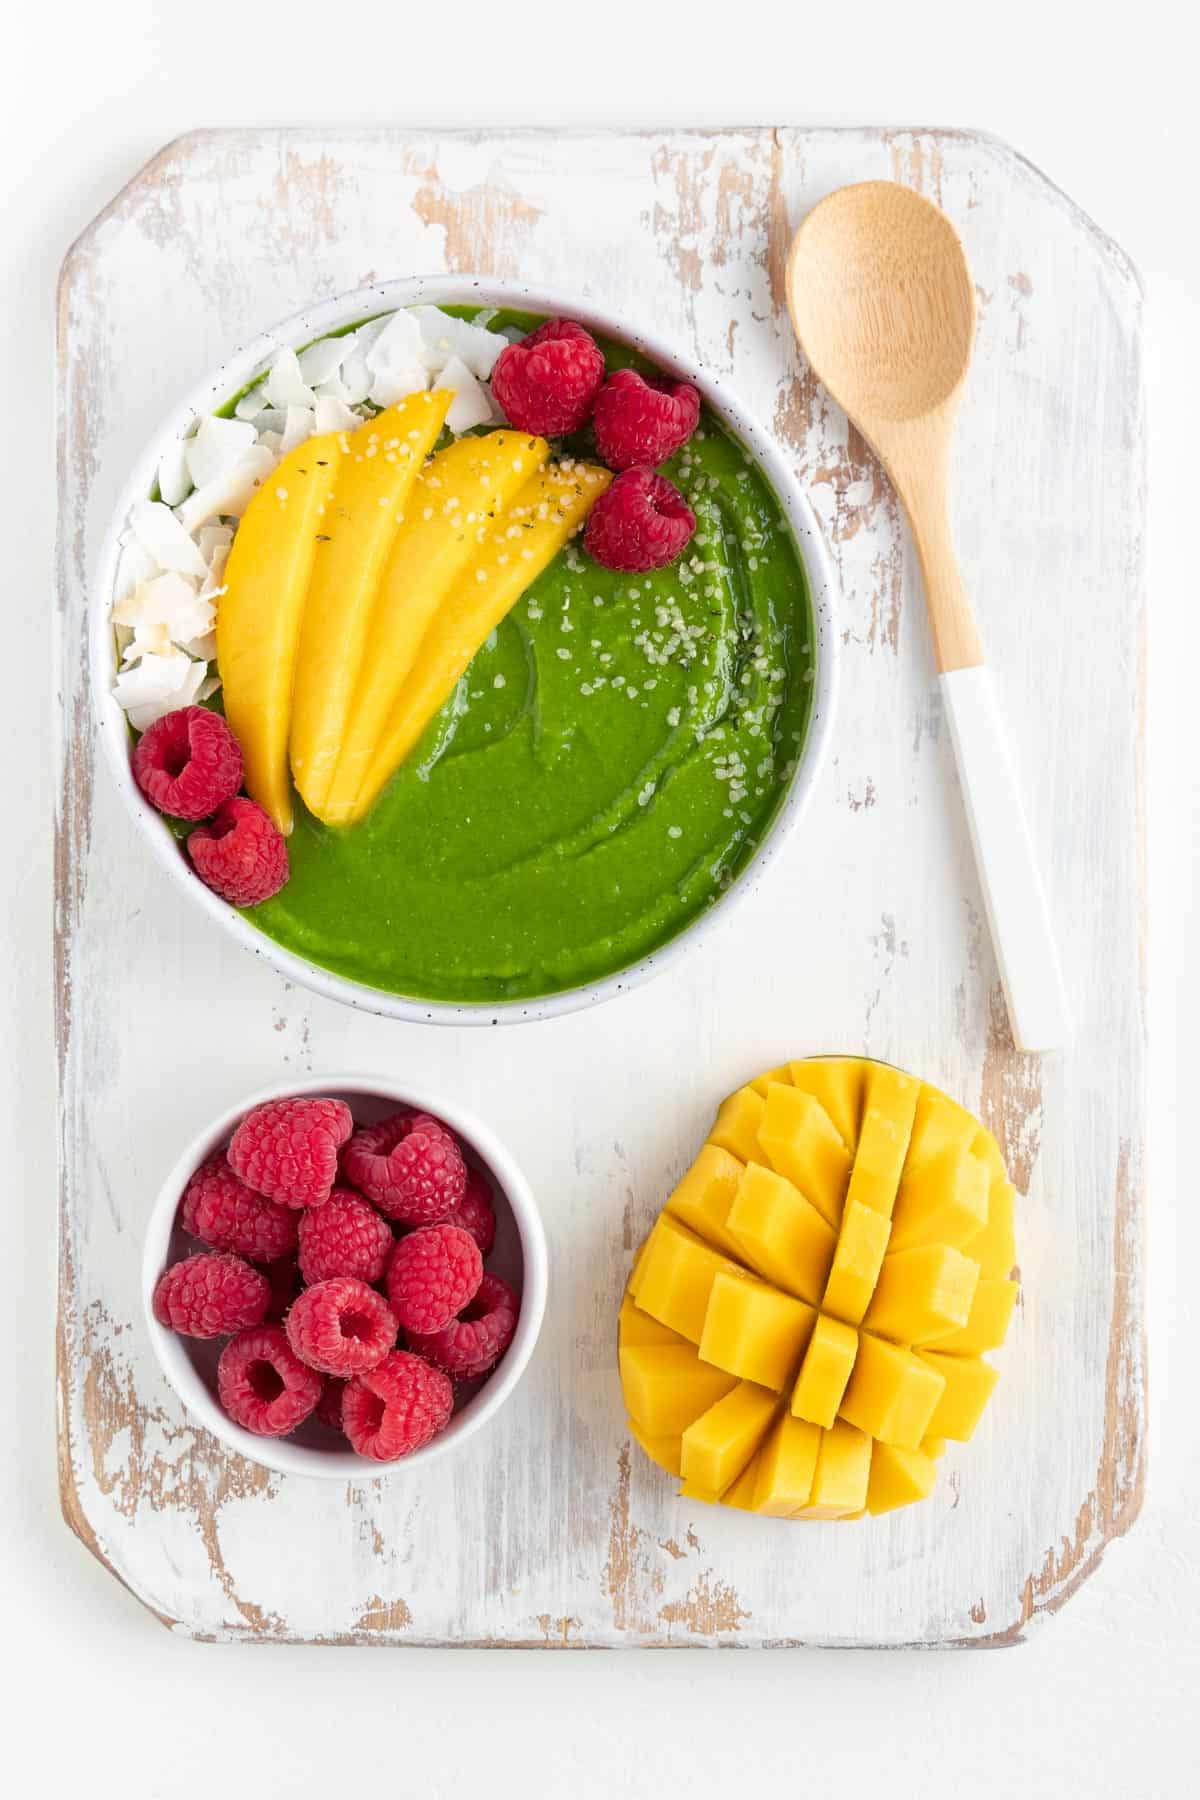 green mango smoothie bowl, sliced mango, and a bowl of raspberries on top of a distressed cutting board